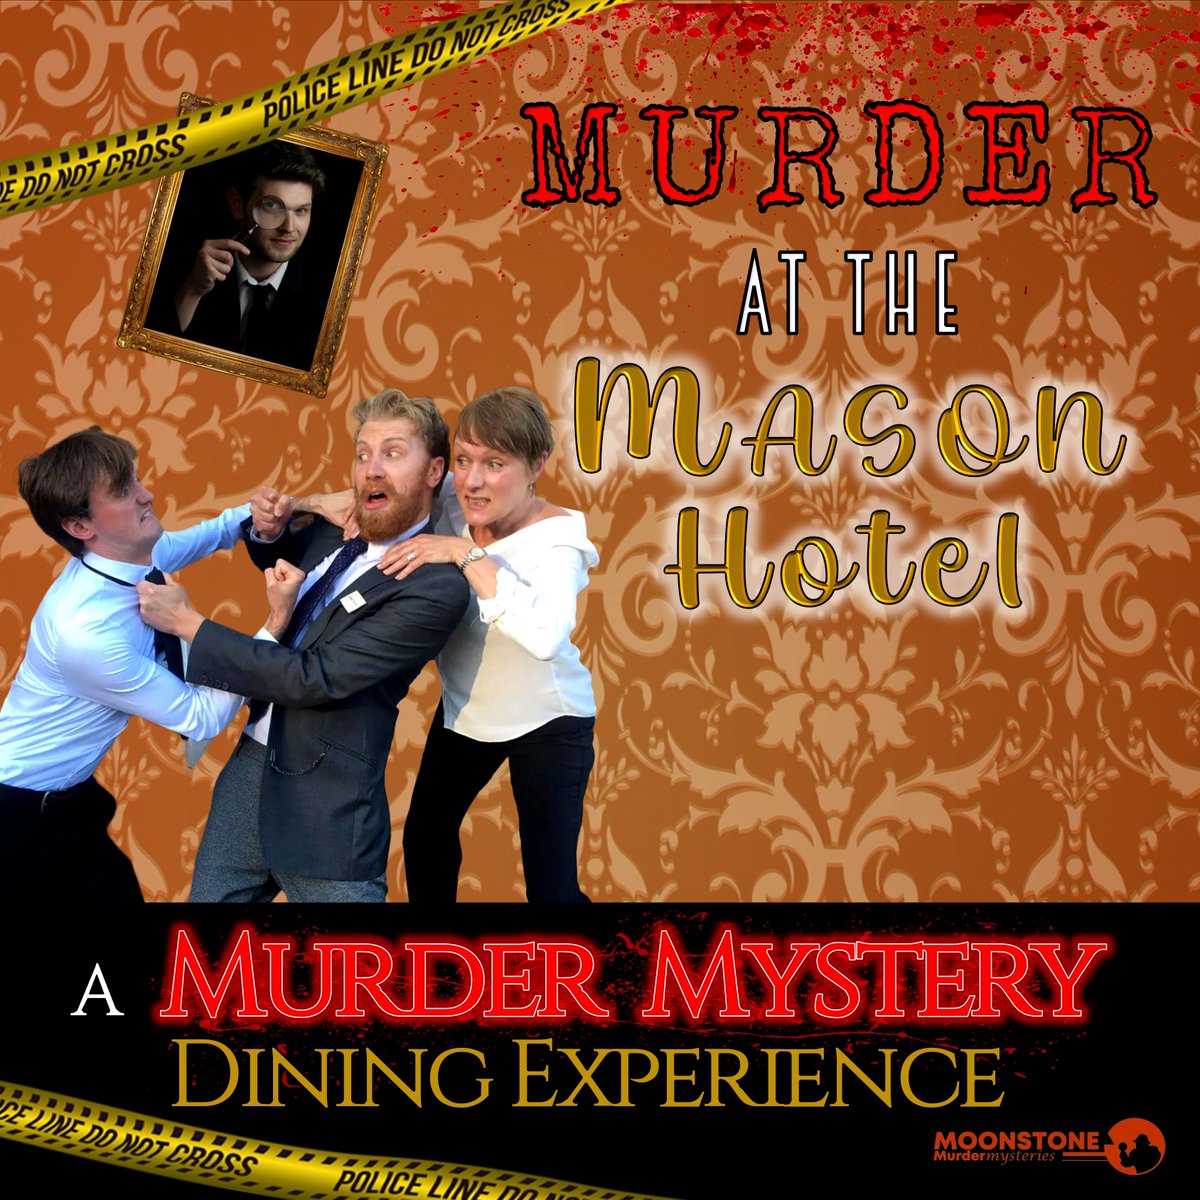 Additional date added due to popular demand - the immersive dining experience ‘Murder at the Mason Hotel’ is now on sale for 20 Jun! Get your tickets quick, at – watermill.org.uk/murder-mystery…